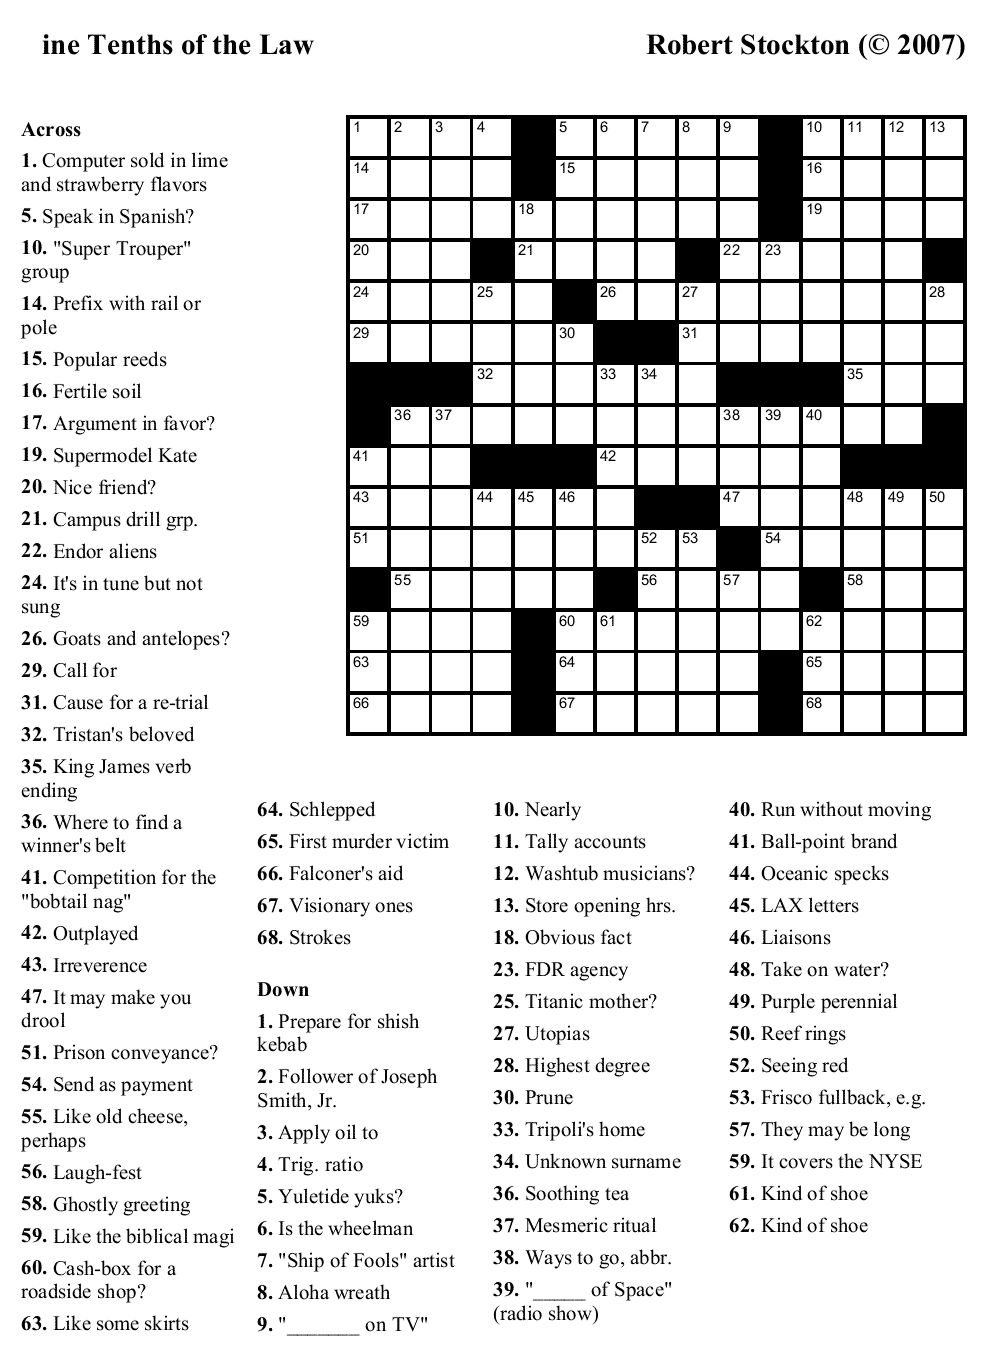 Crossword Puzzles Printable - Yahoo Image Search Results | Crossword - Printable Crossword Puzzles.net